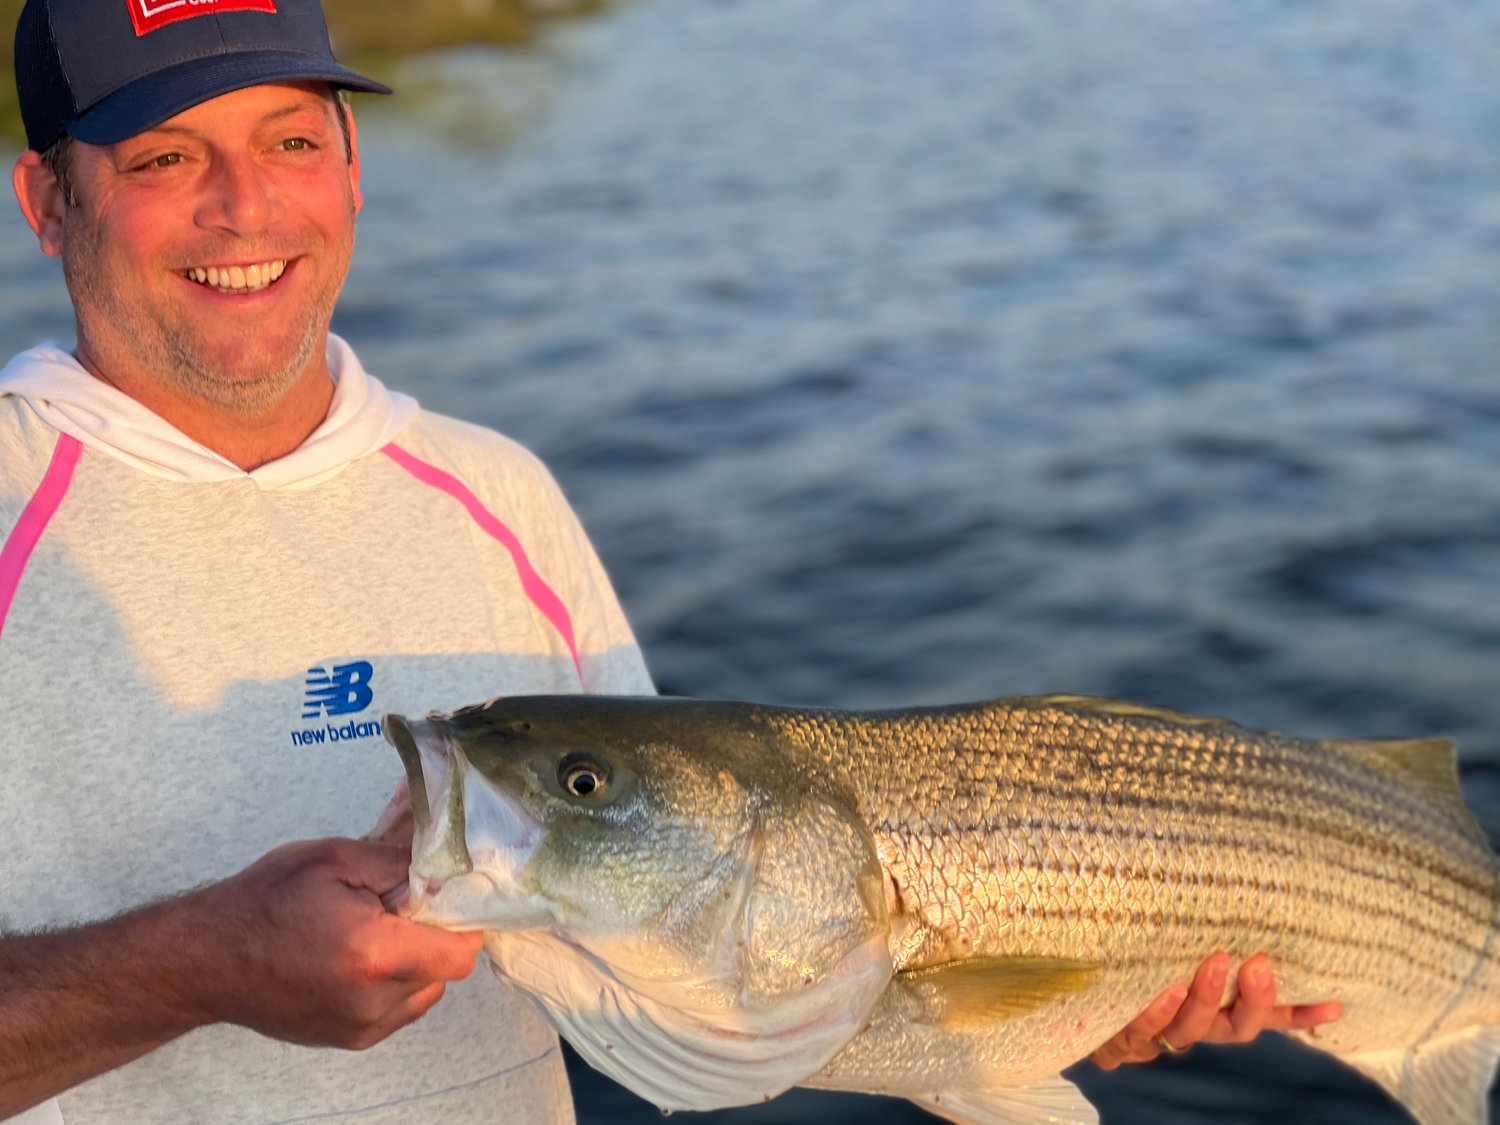 Alex Migel with a big striped bass he caught in the harbor